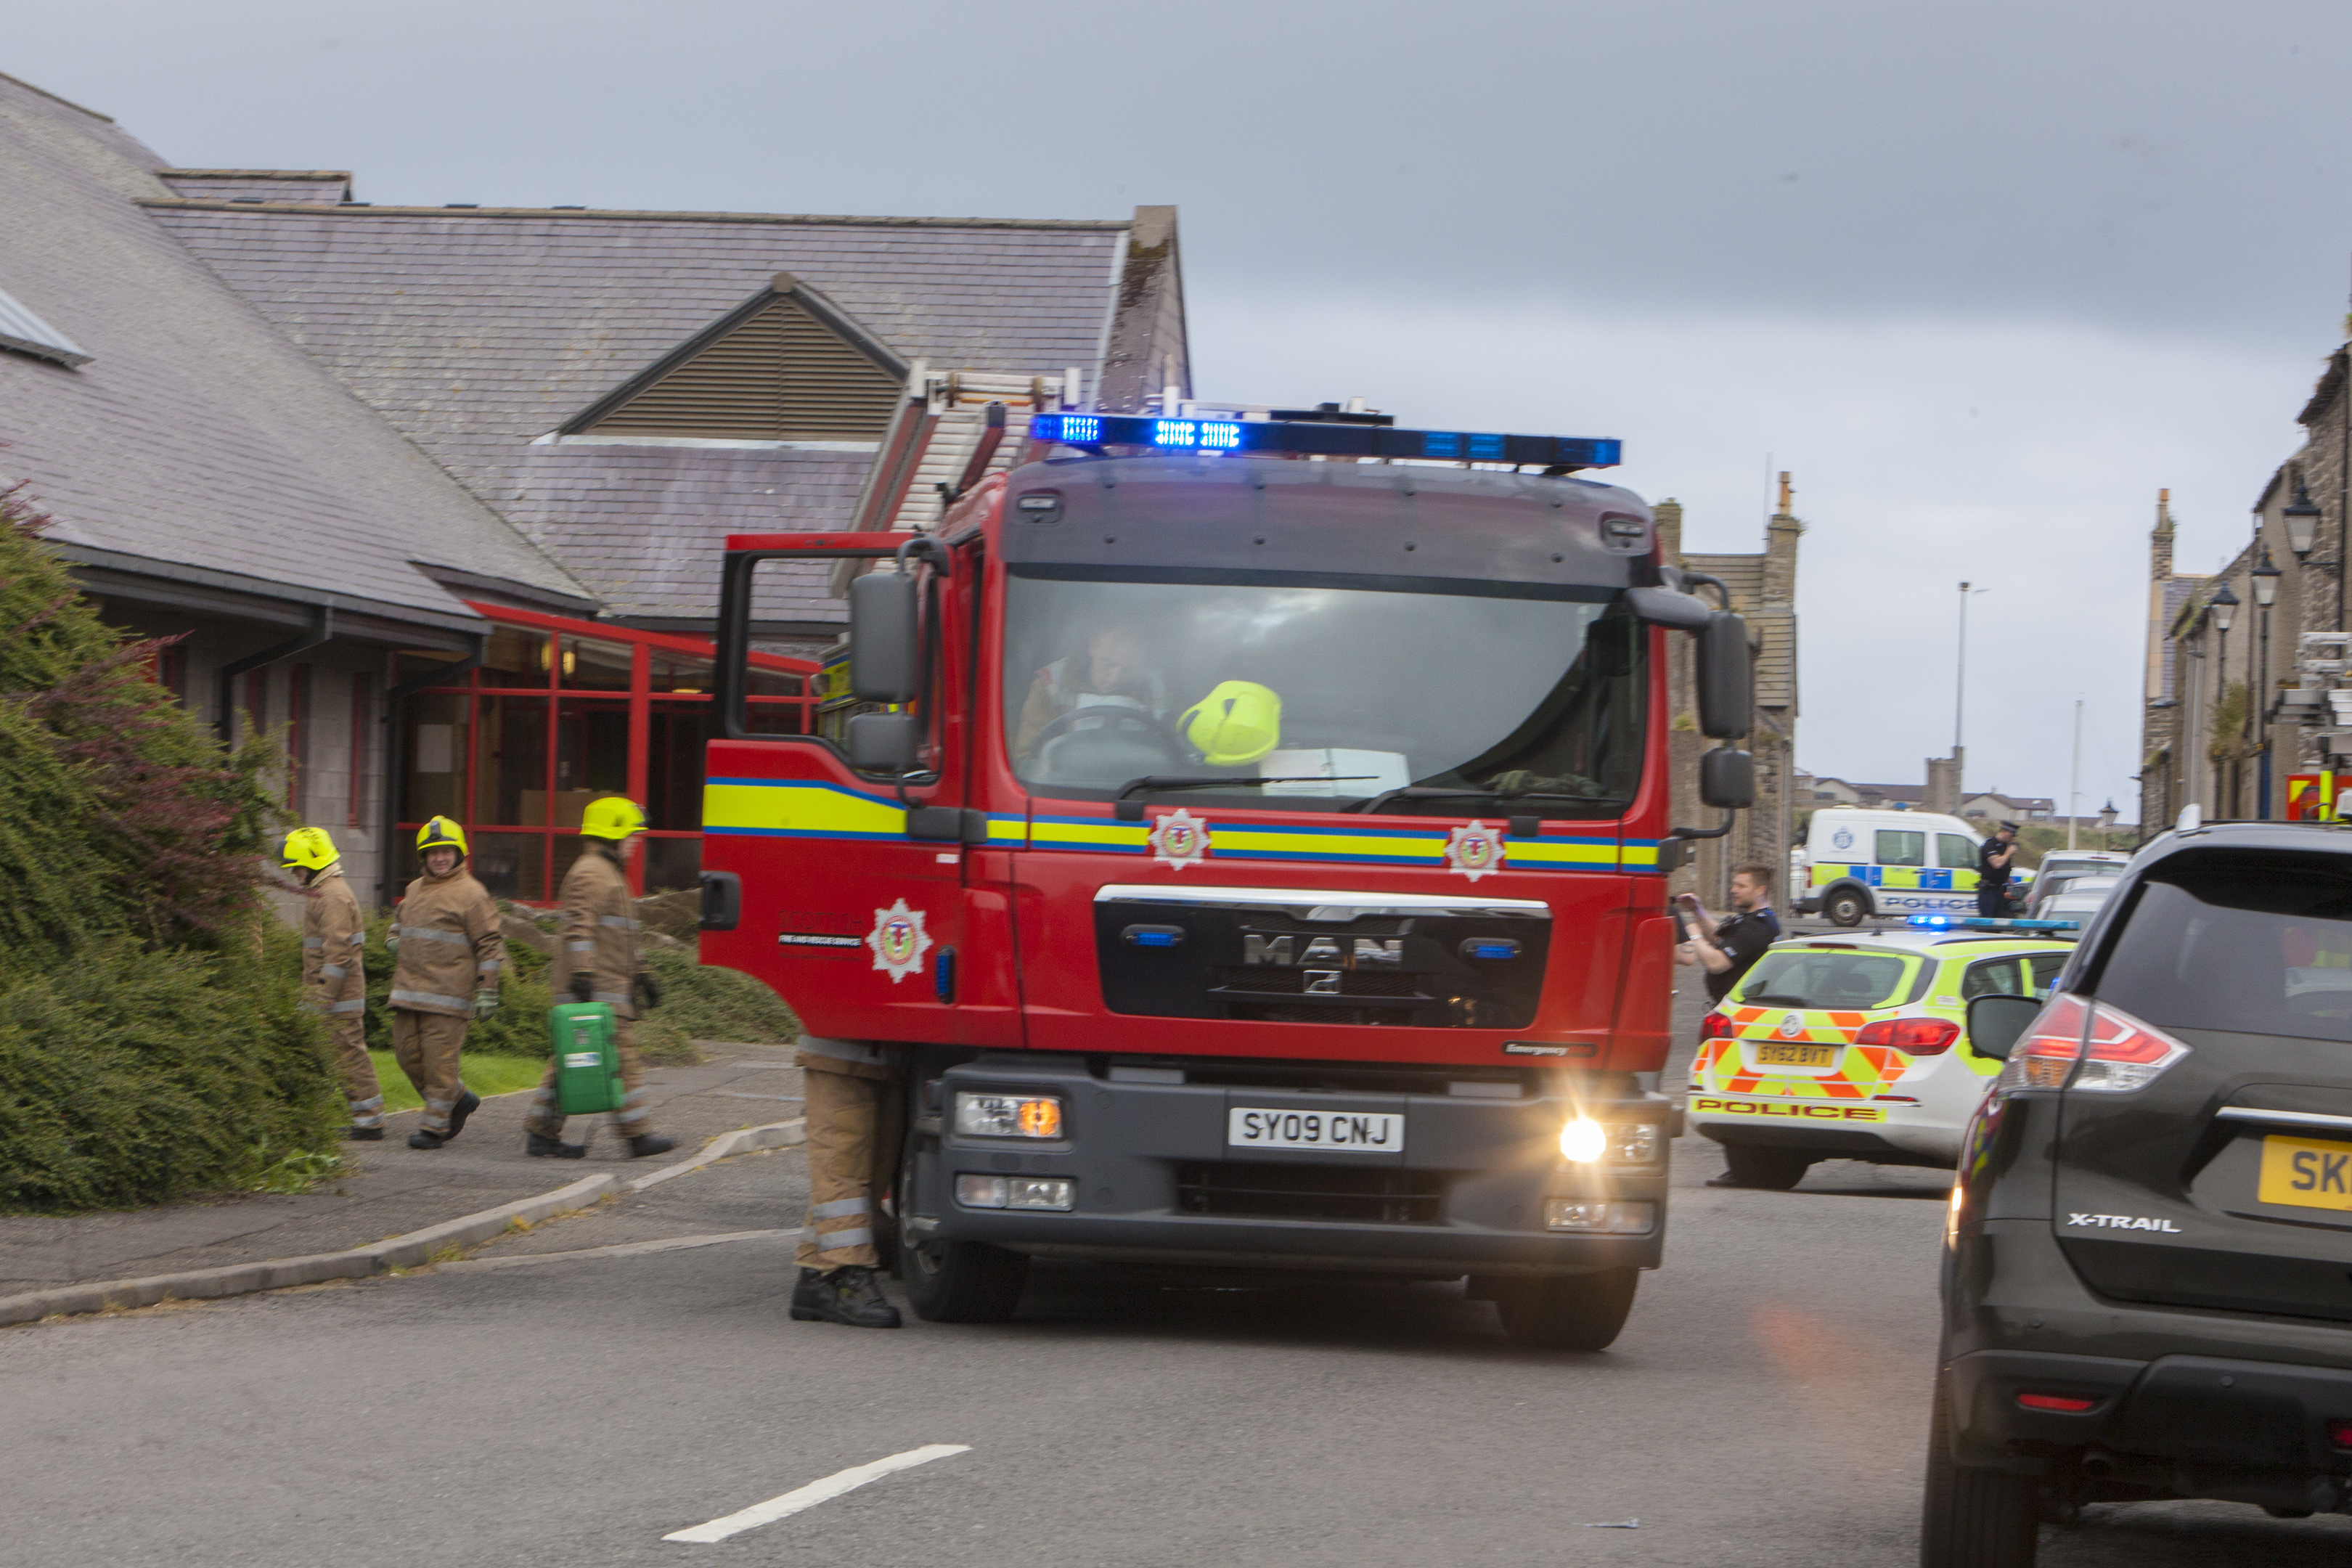 The scene at Wick Swimming Pool, where police, fire and ambulance attended following a chemical problem.